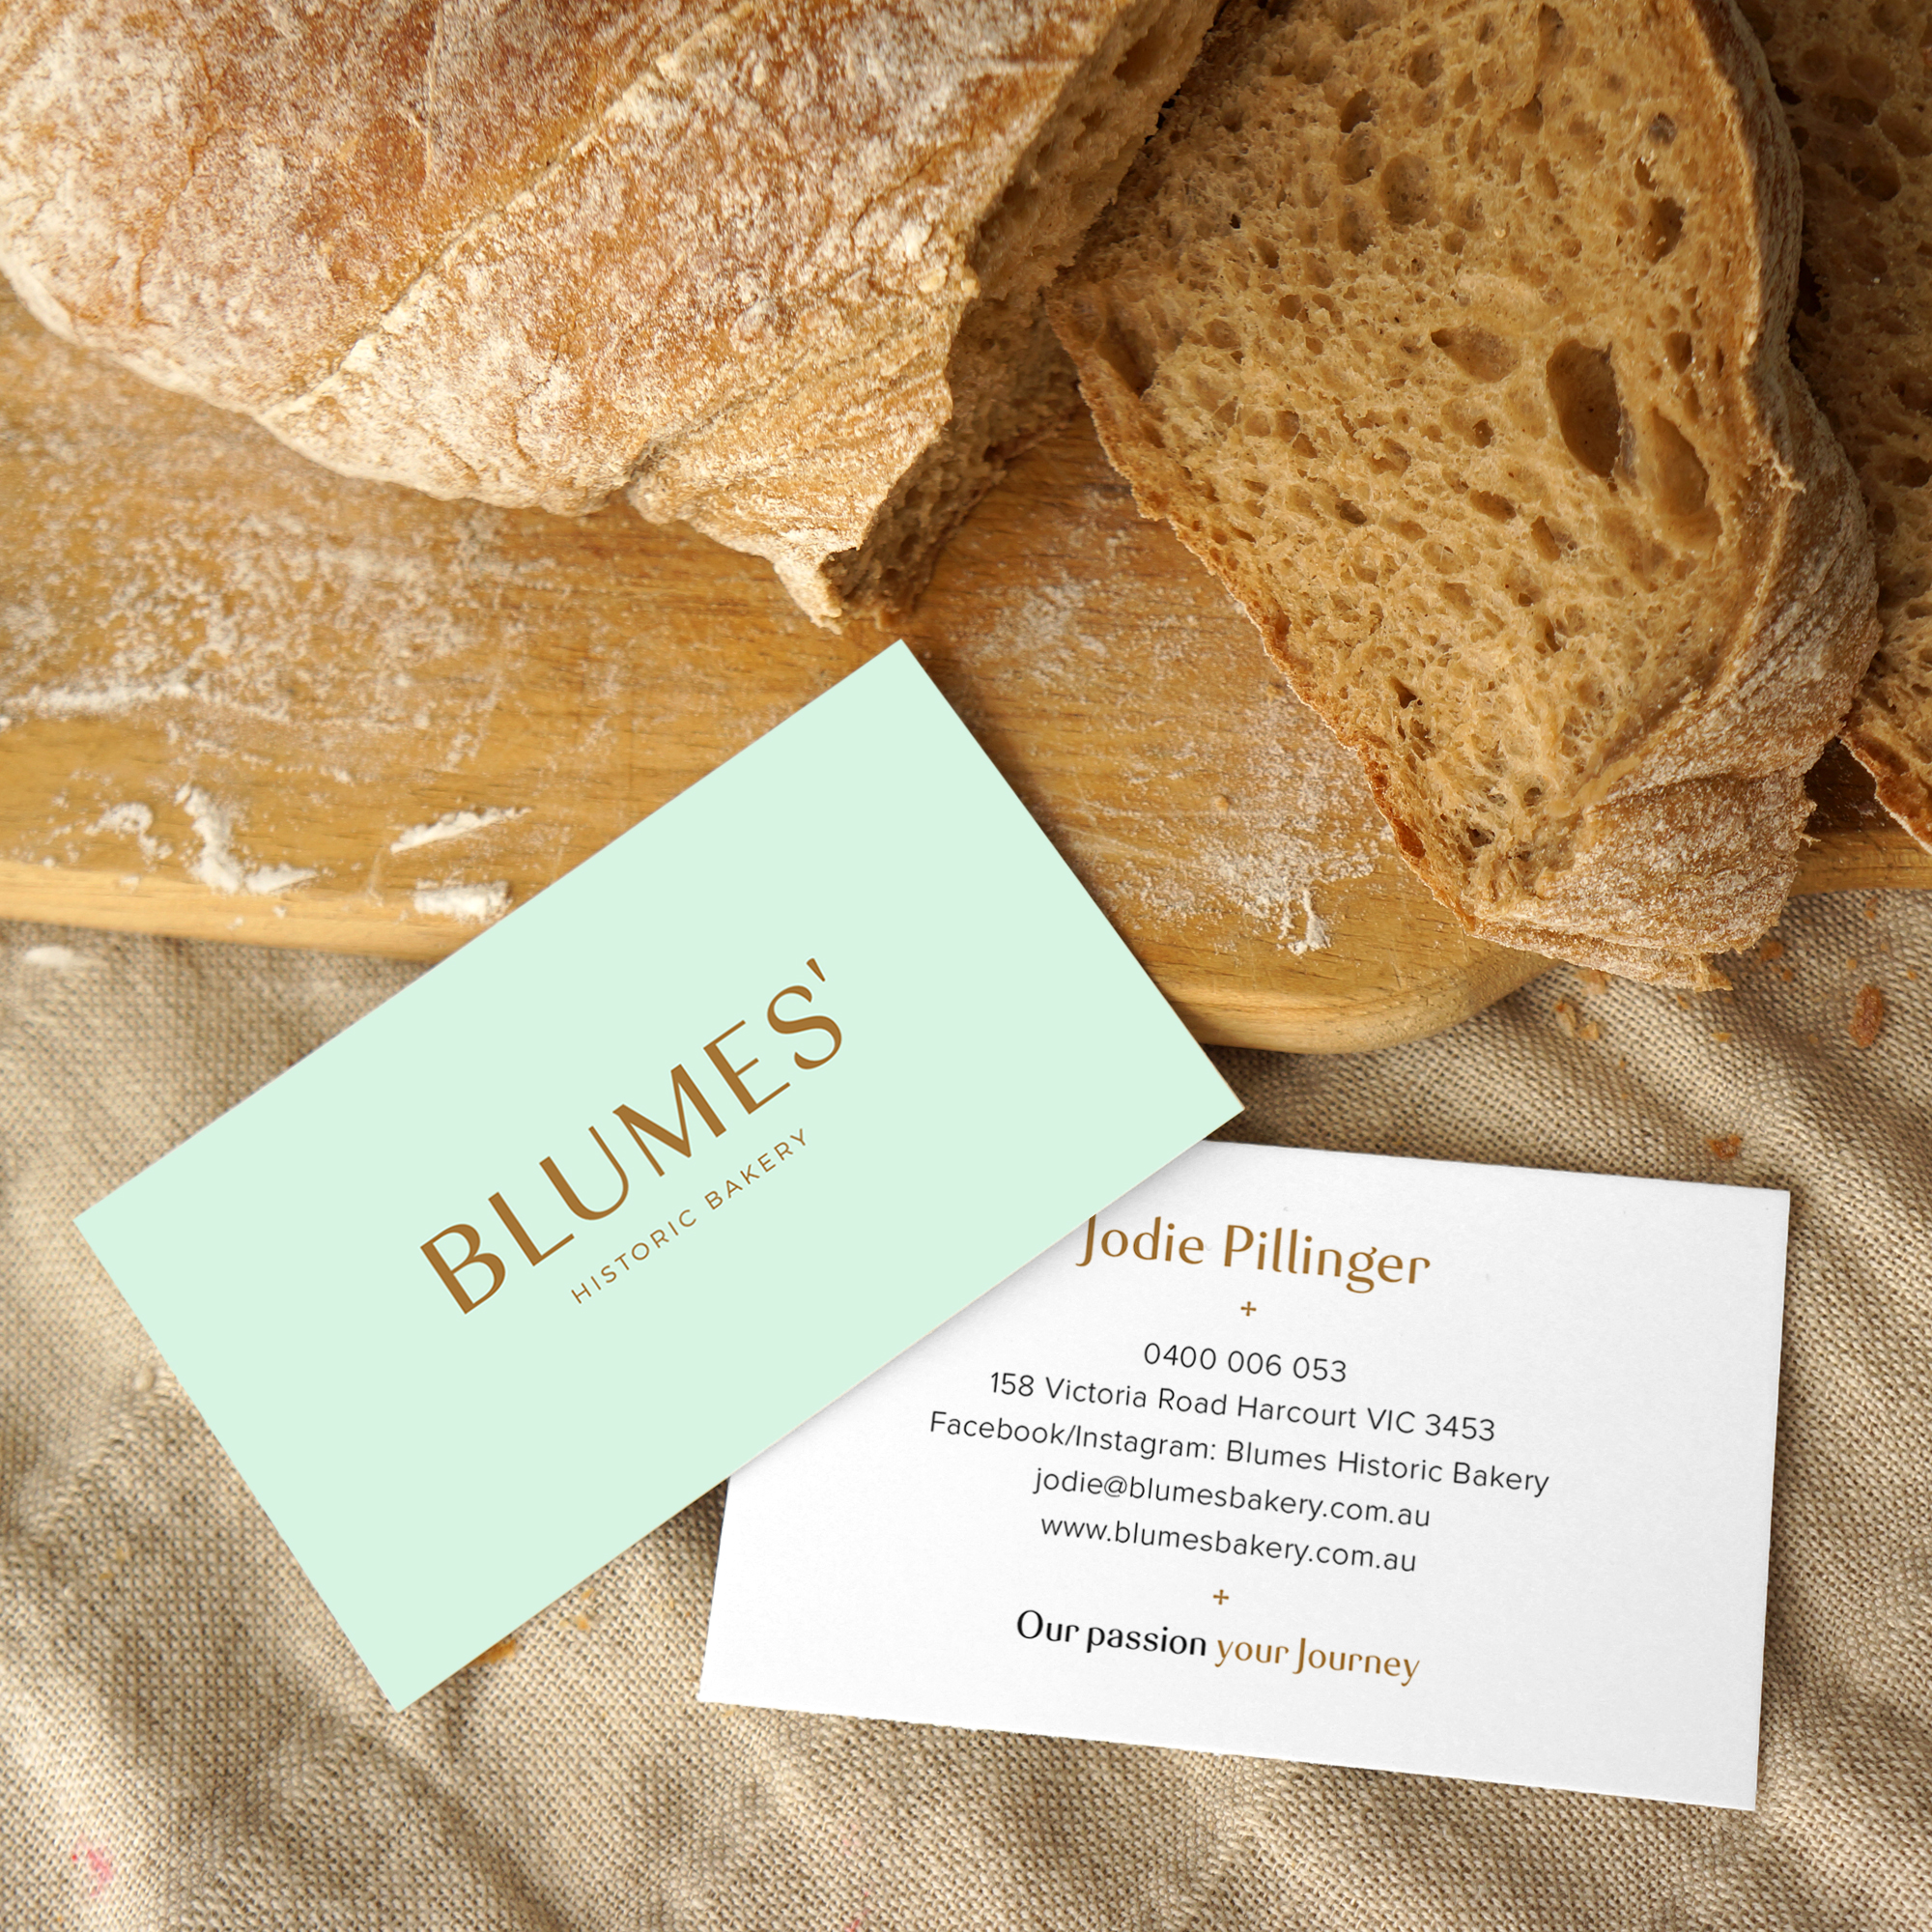 Blumes' Bakery business cards